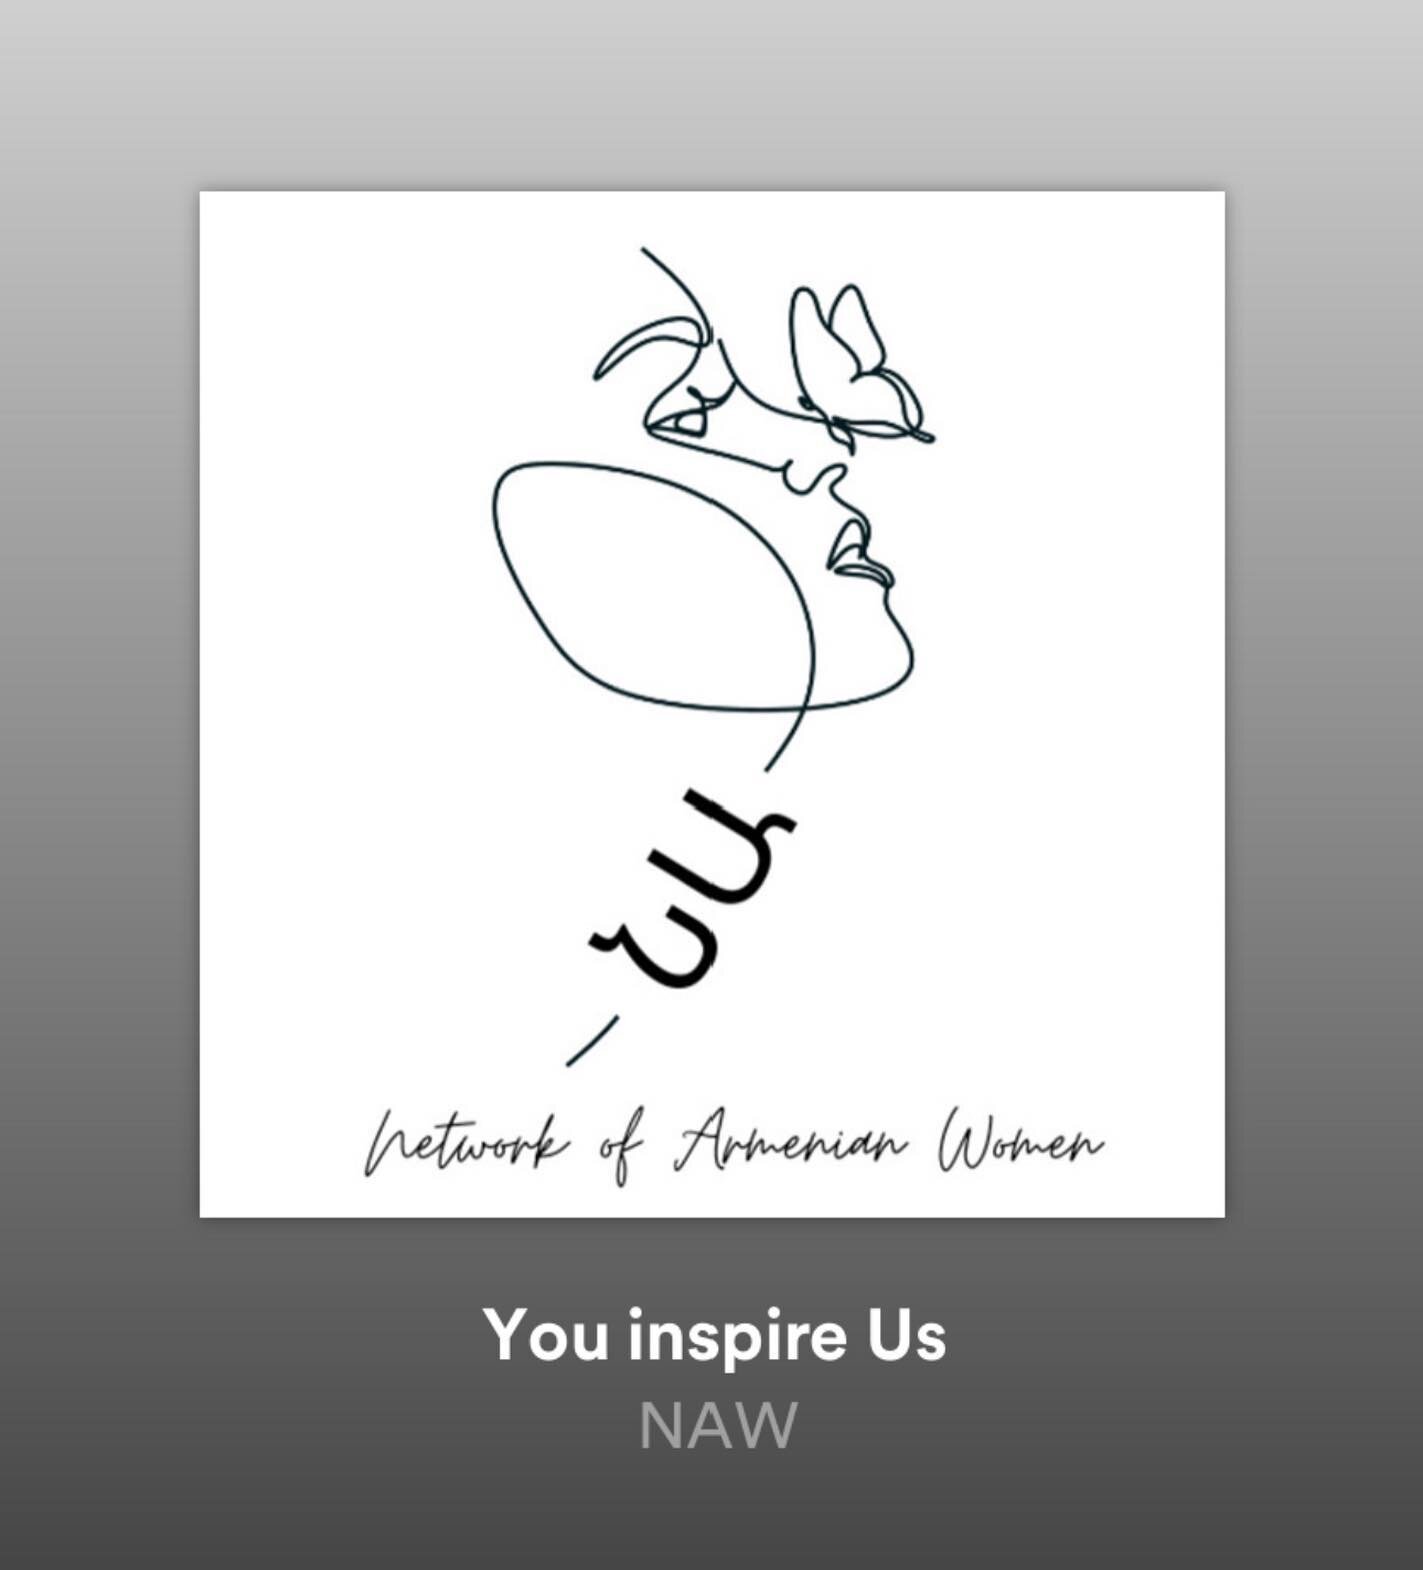 You inspire Us&hellip;.. 

Listen now. Link in our bio 💋 #podcastingfunny #podcasting #podcast #armenian #women #naw #network #a #you #inspire #usa #spotify #connect #thankyou